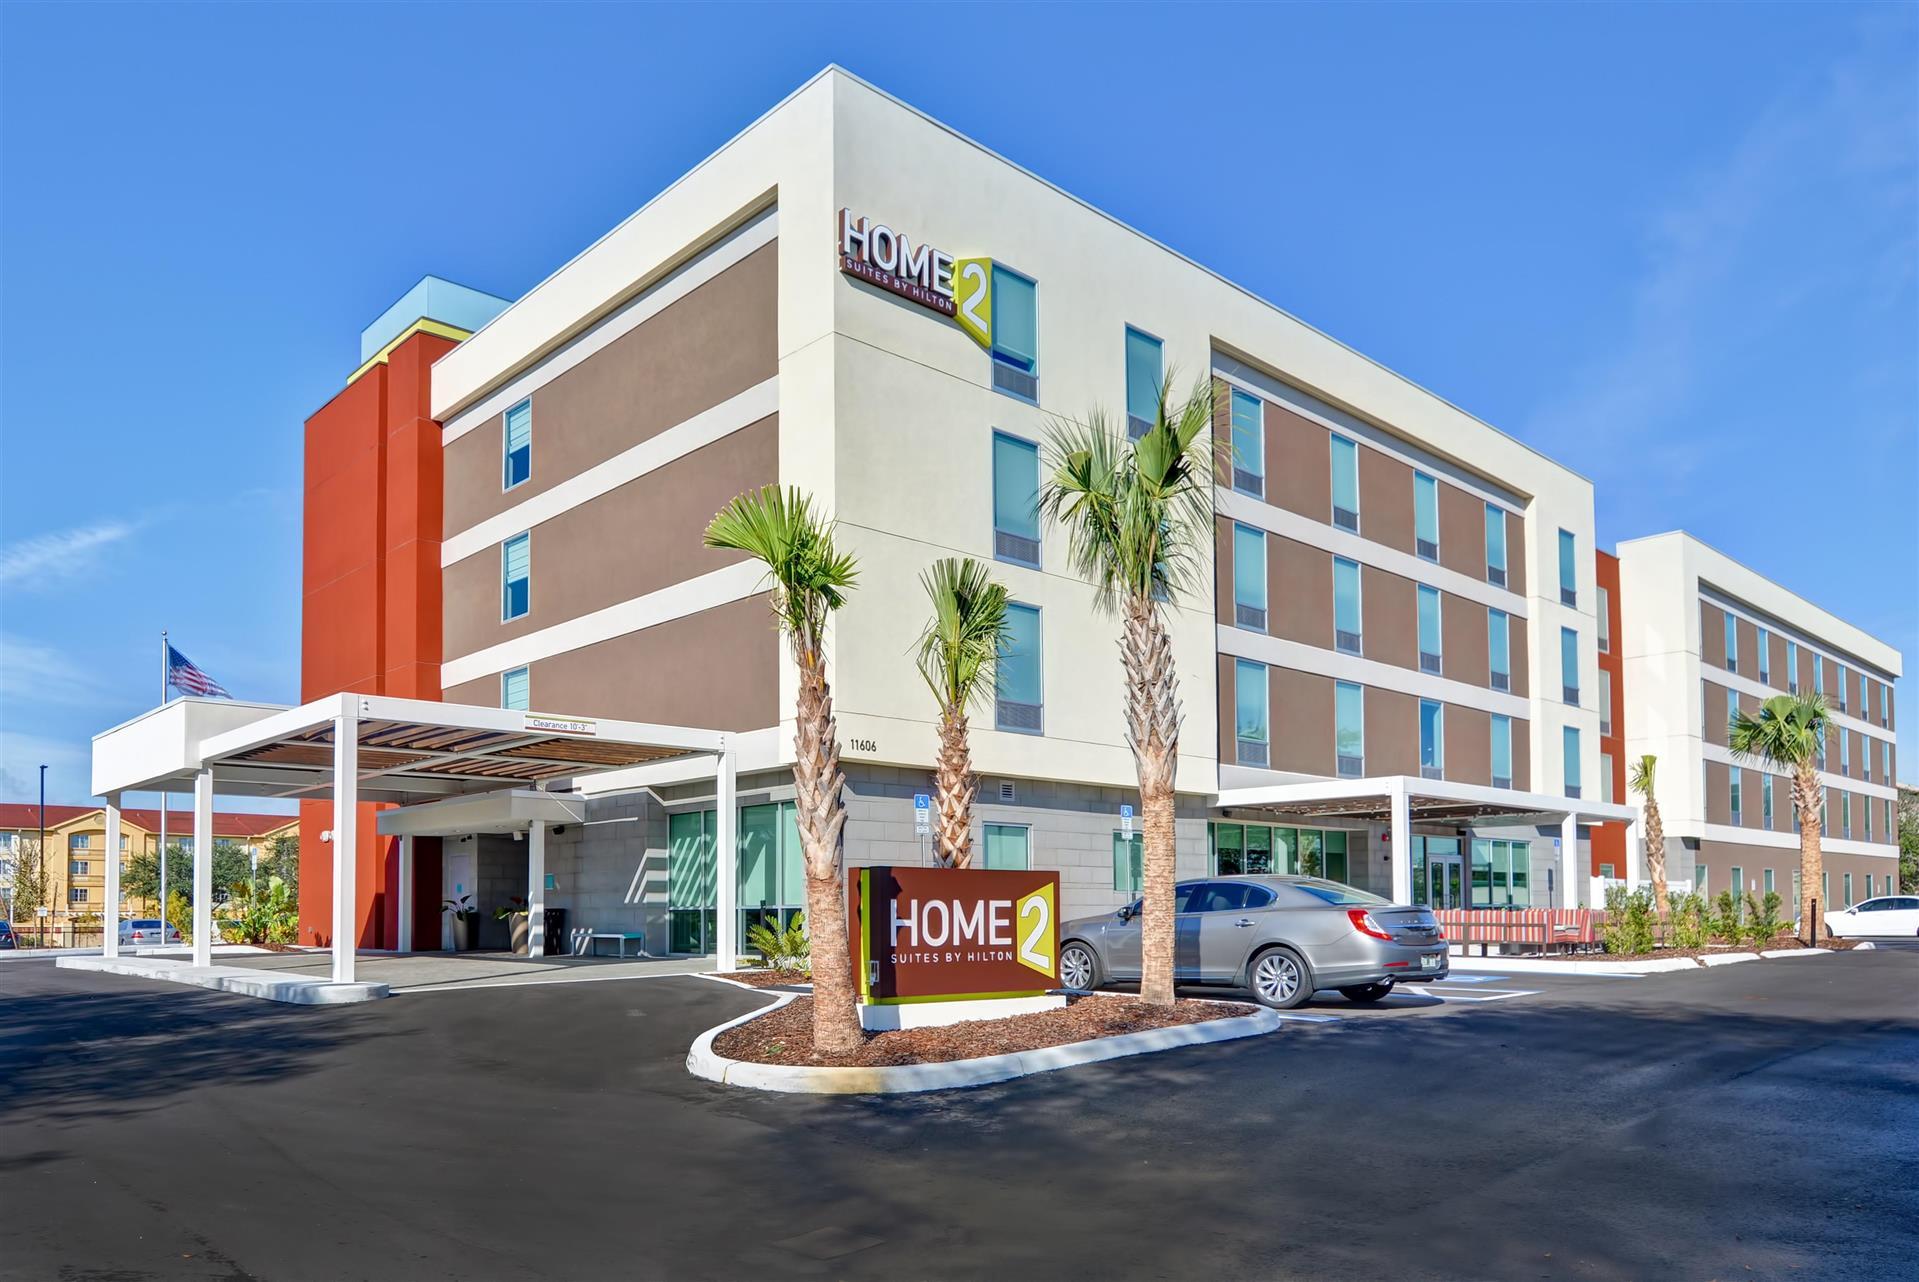 Home2 Suites by Hilton Tampa USF Near Busch Gardens in Tampa, FL